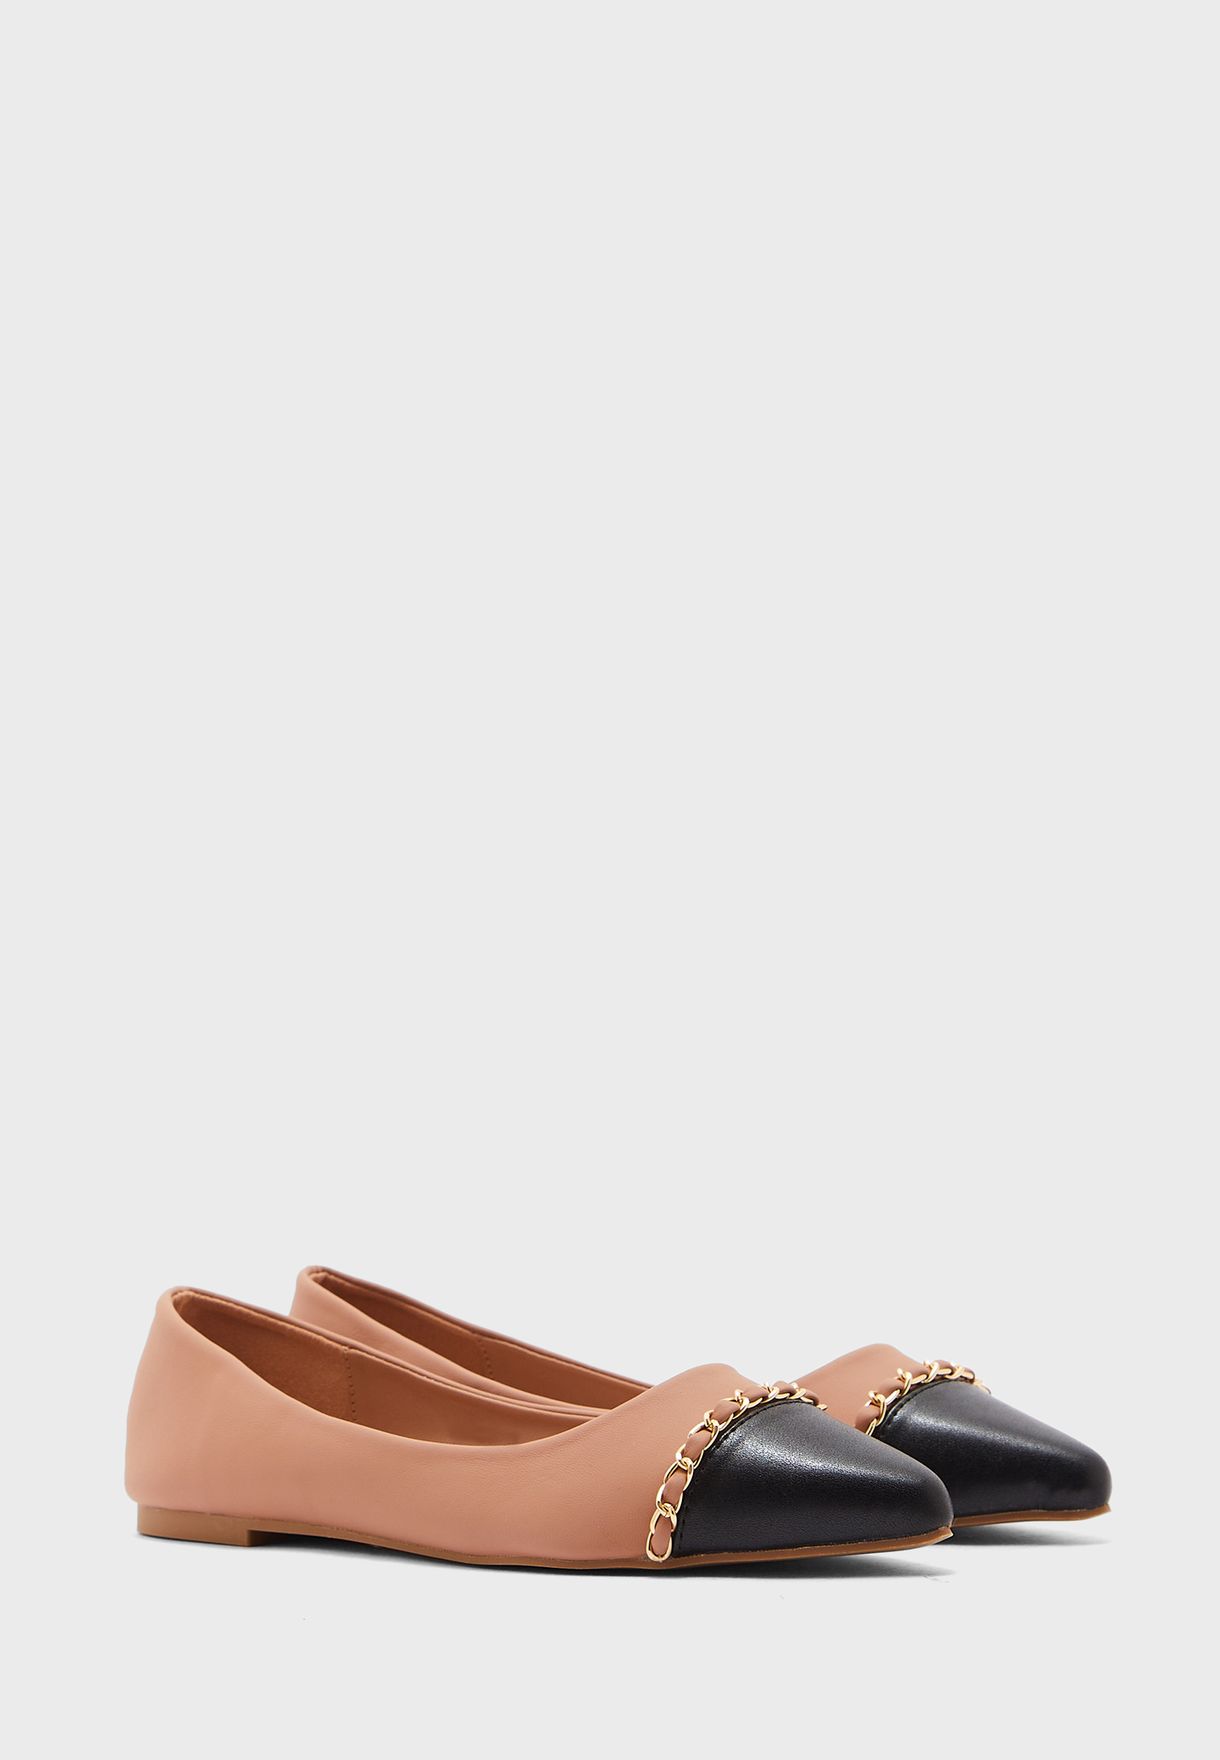 Colourblock Pointed Flat Shoe With Chain 